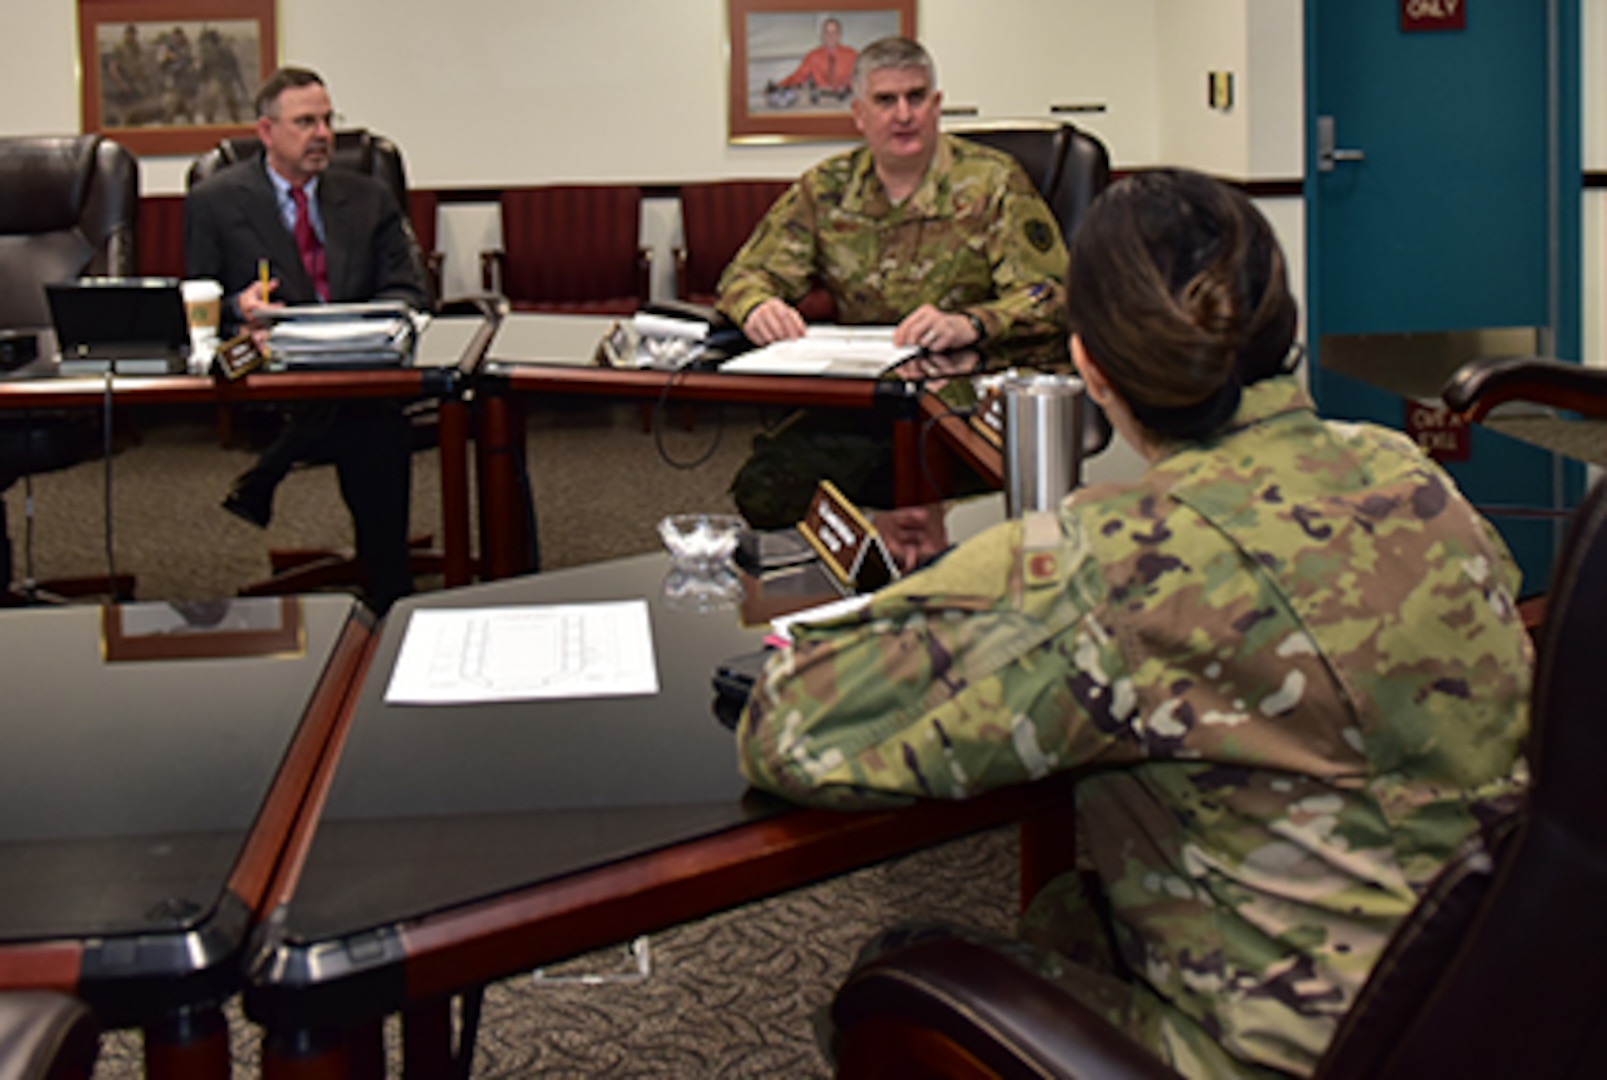 Three individuals hold meeting at a table, two military and one civilian